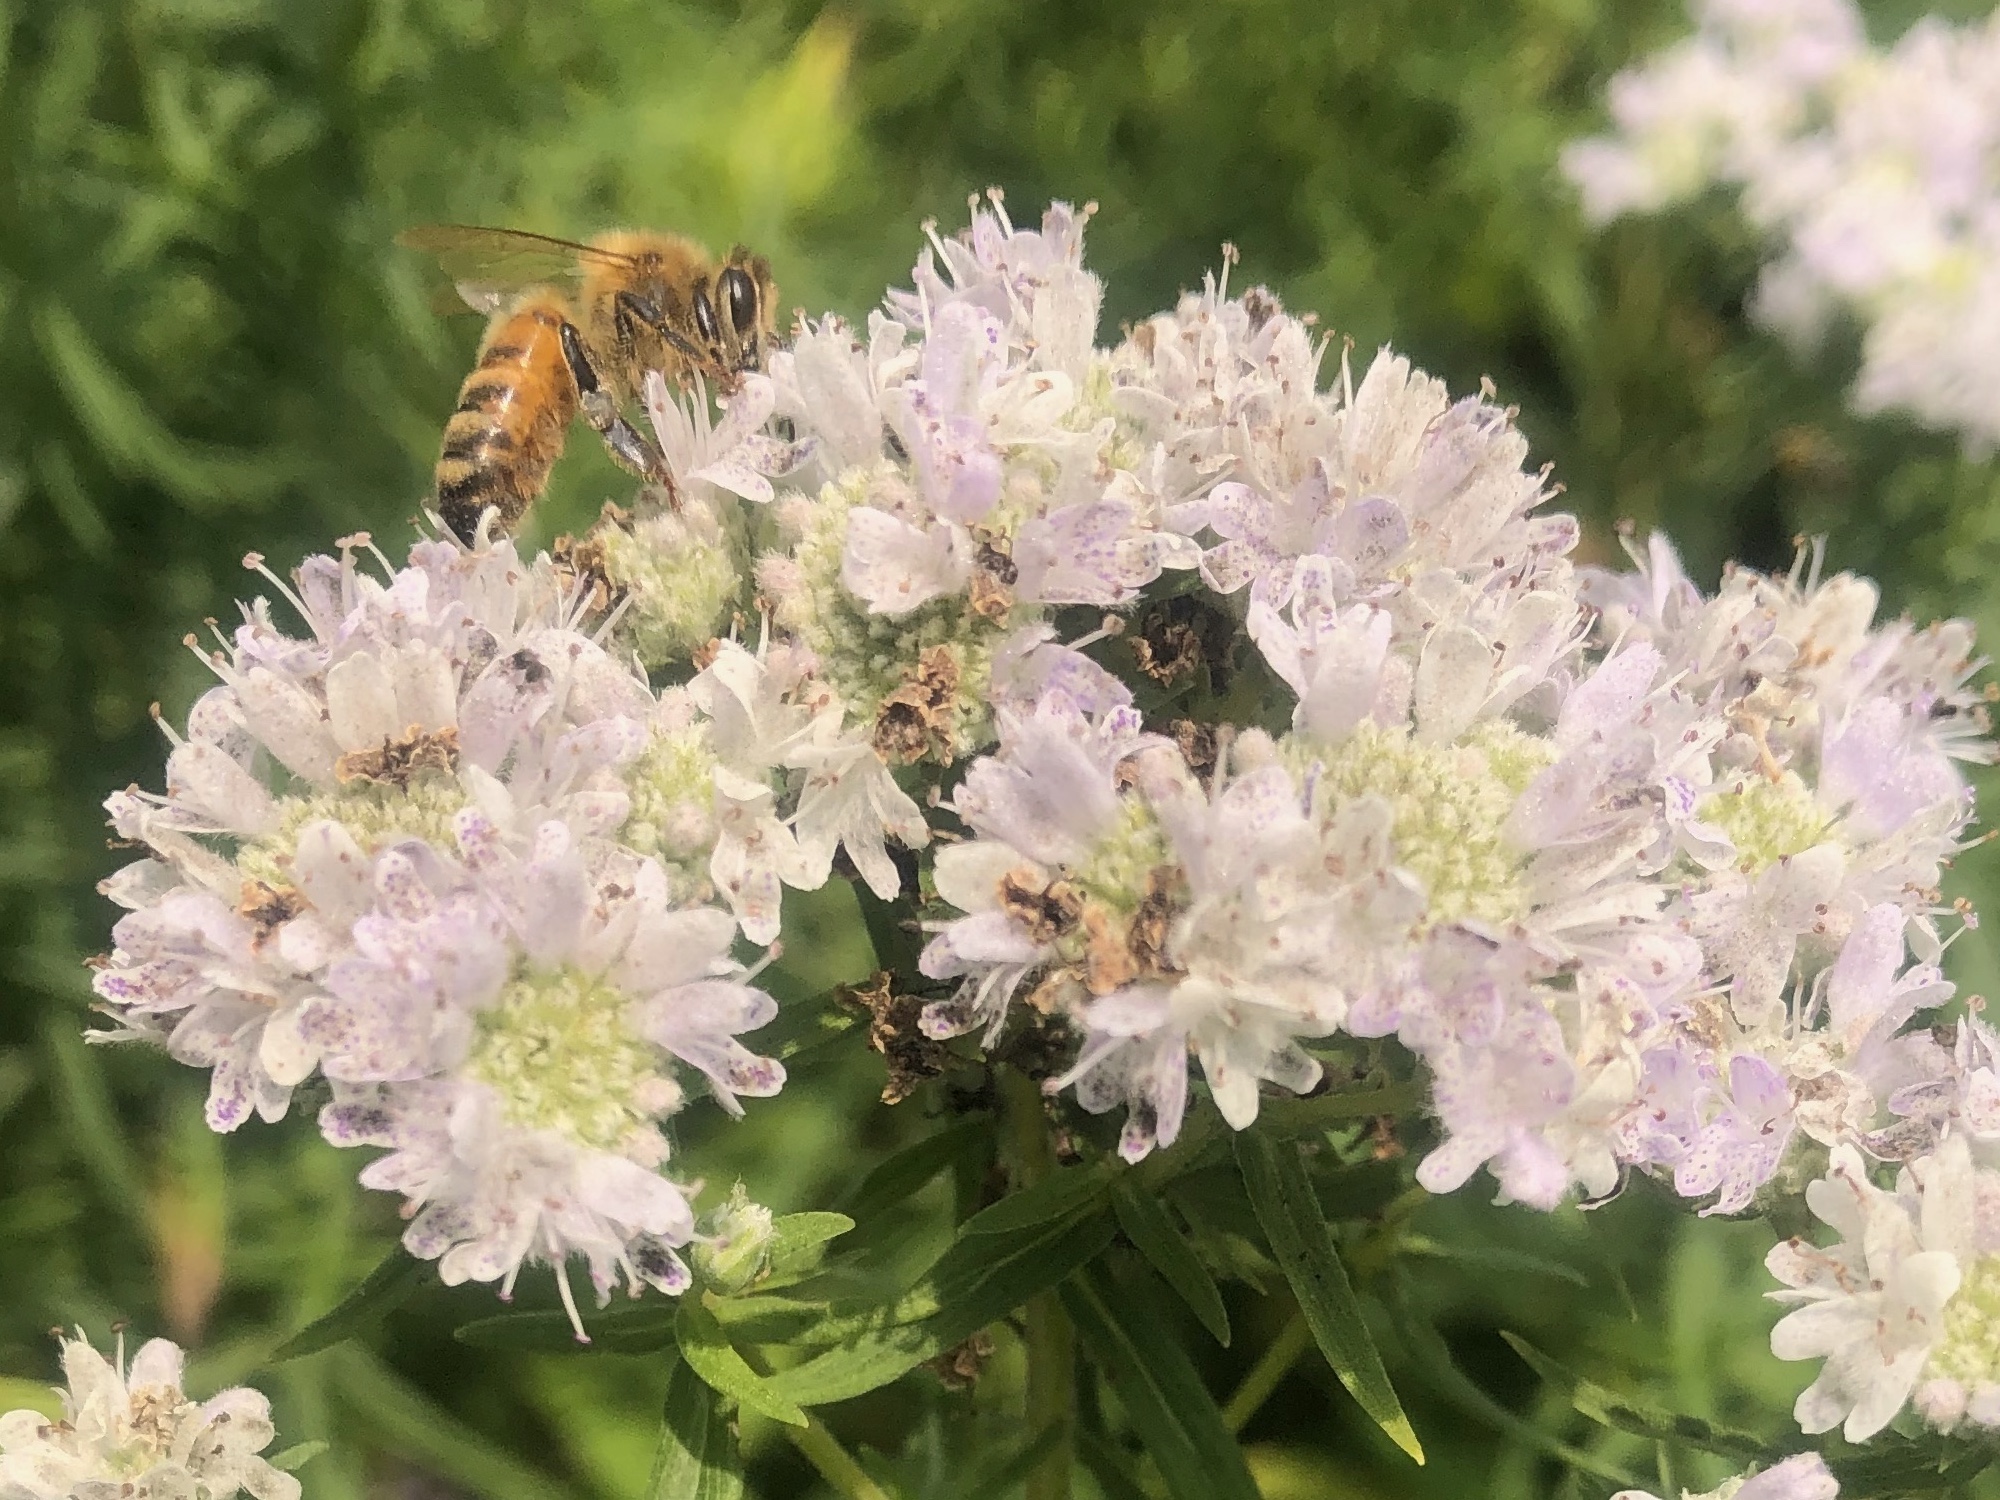 Bee on Common Mountain Mint overlooking Dawley Conservancy in Madison, Wisconsin on July 22, 2021.